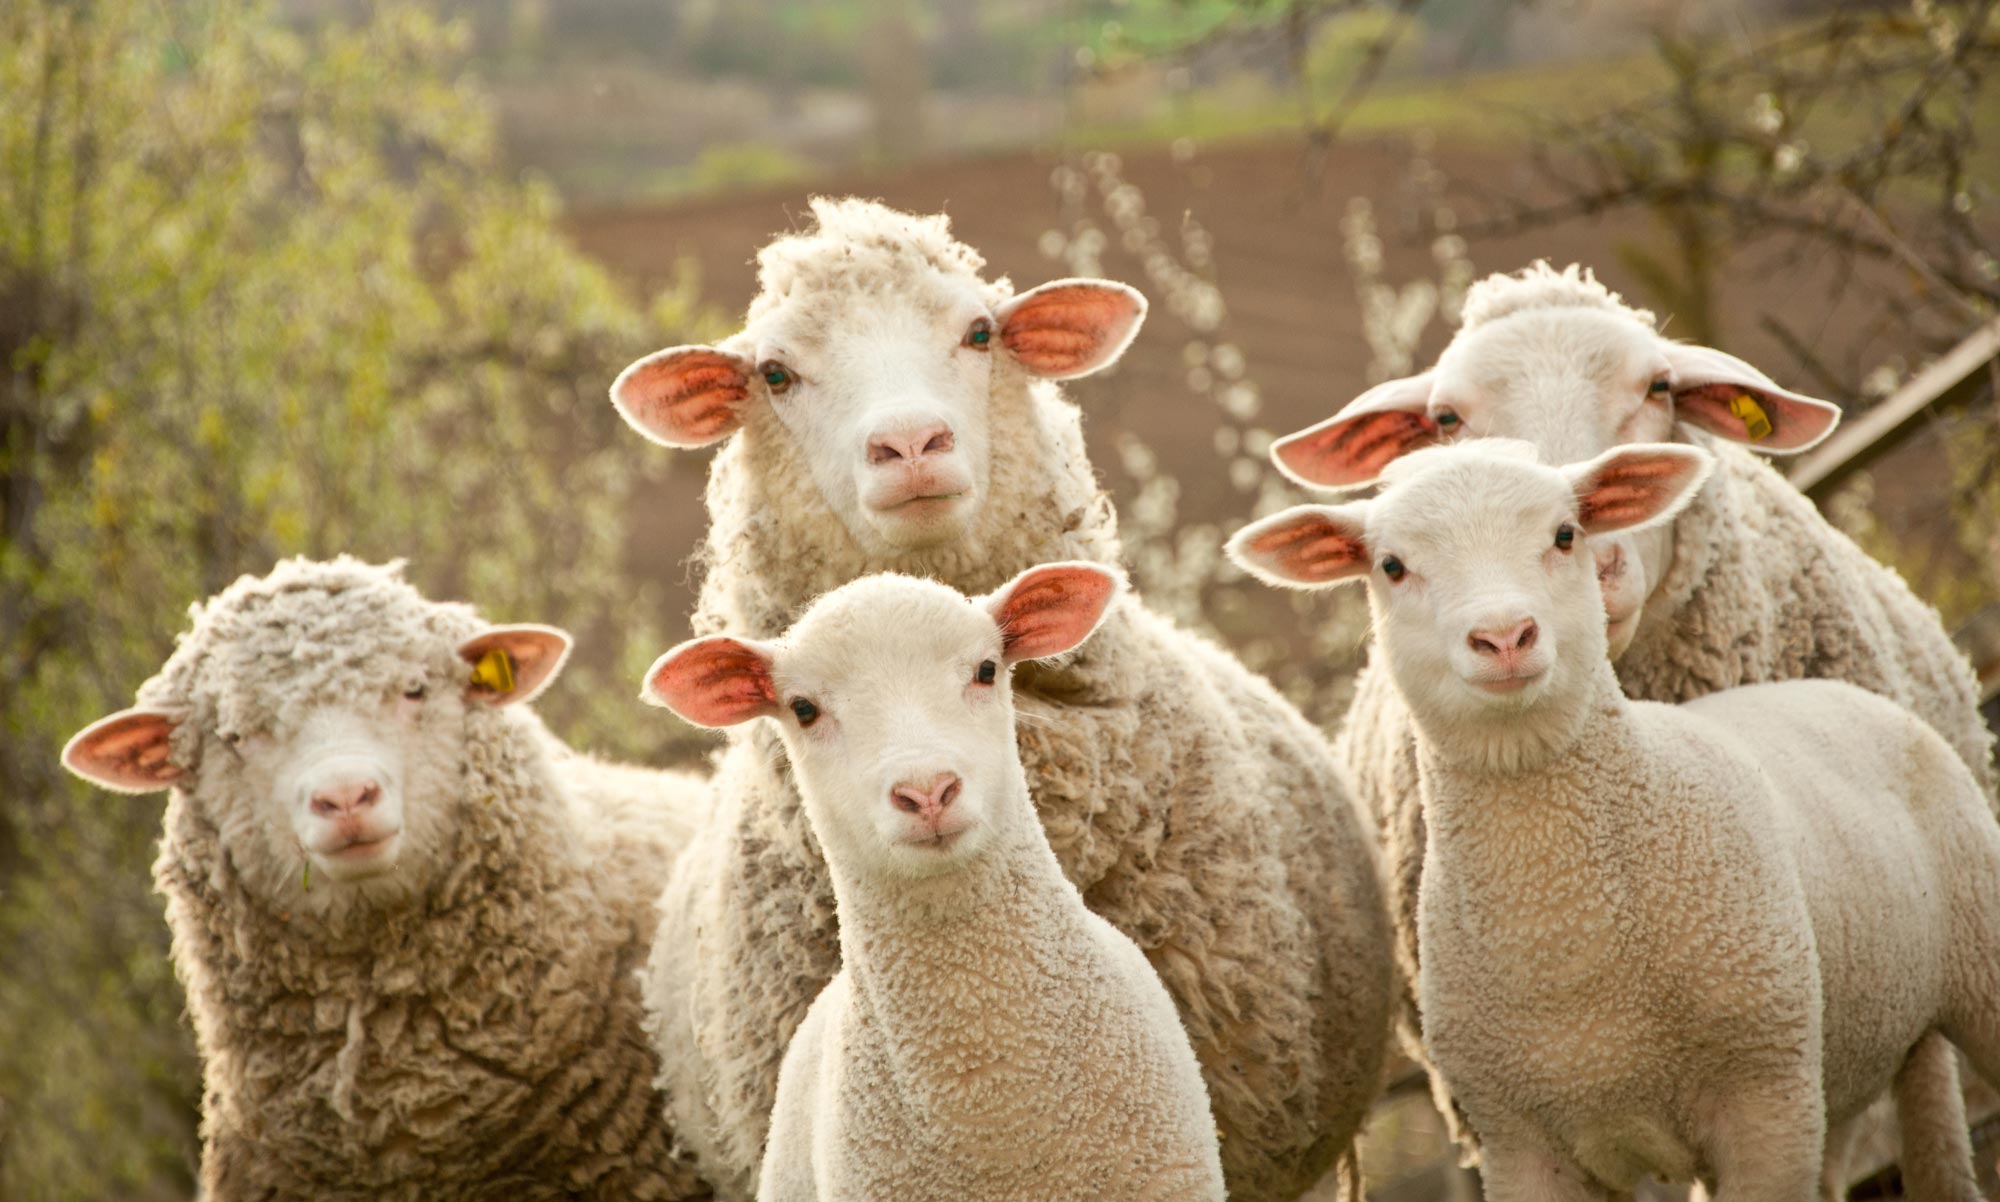 Slaughtering Sheep on Eid Day: Cruelty to Animals? | About Islam